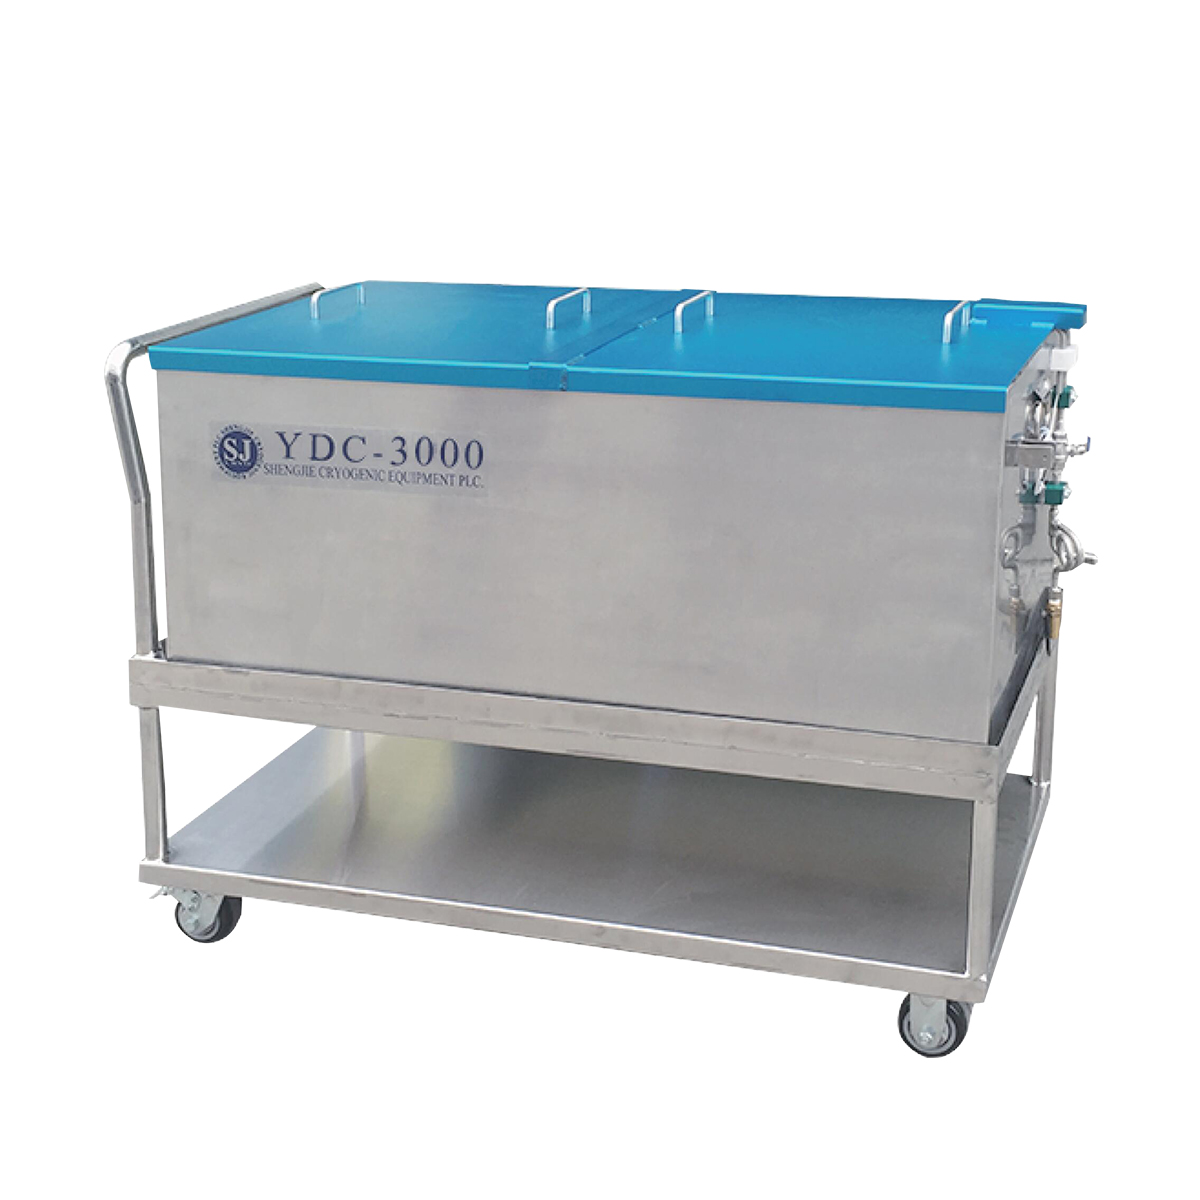 Cryogenic Tanks from Leading Chinese Manufacturer - Find High-Quality Options